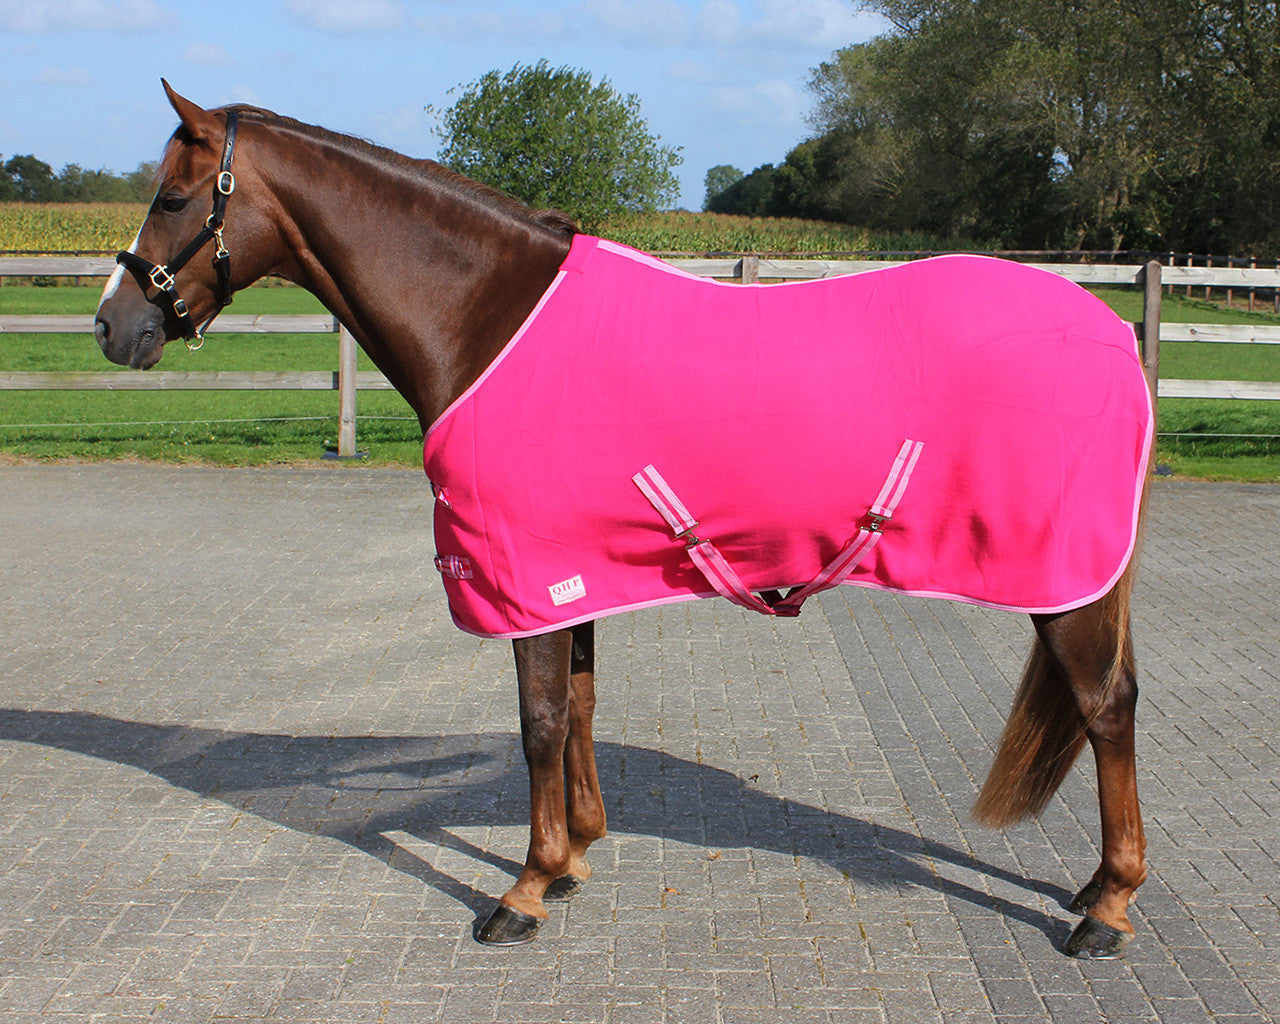 Personalised Equestrian Horse Pony Fleece Rug Cooler - Script Style